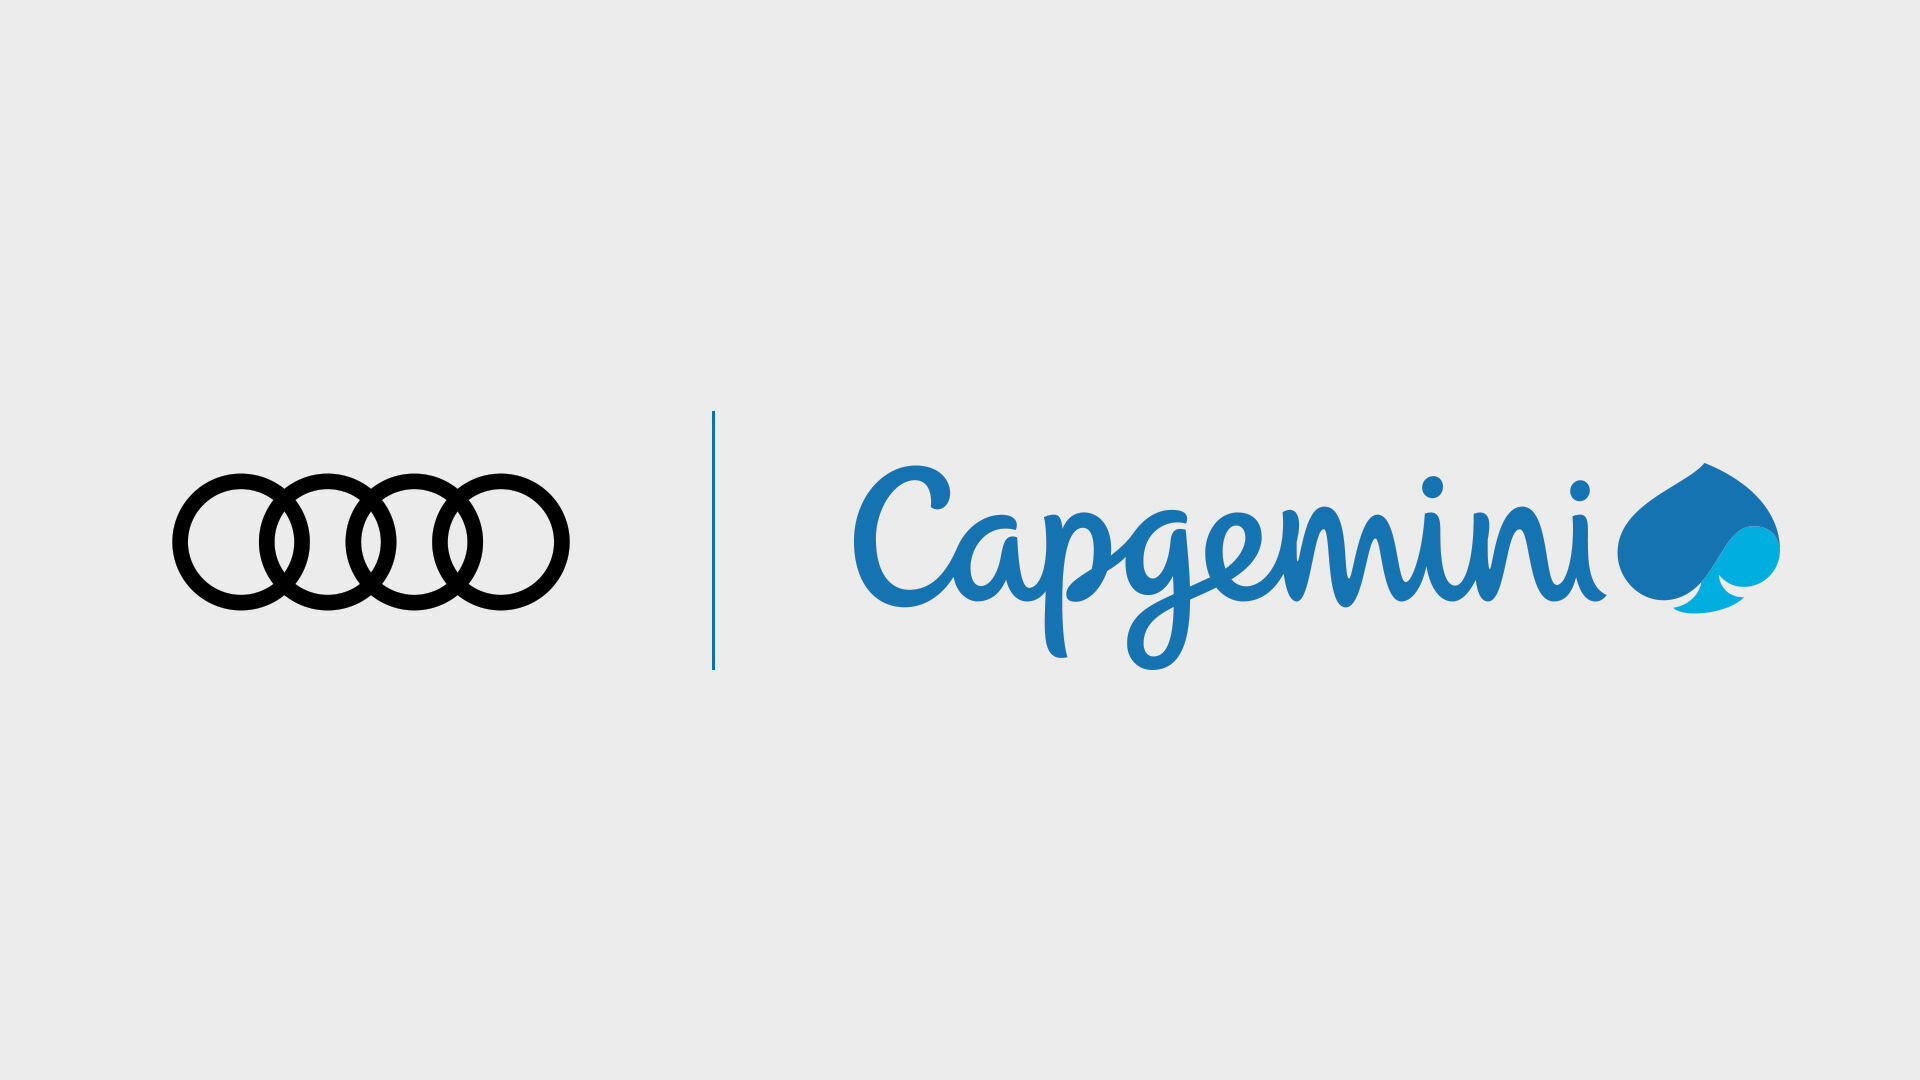 Capgemini and Audi plan to form a joint venture